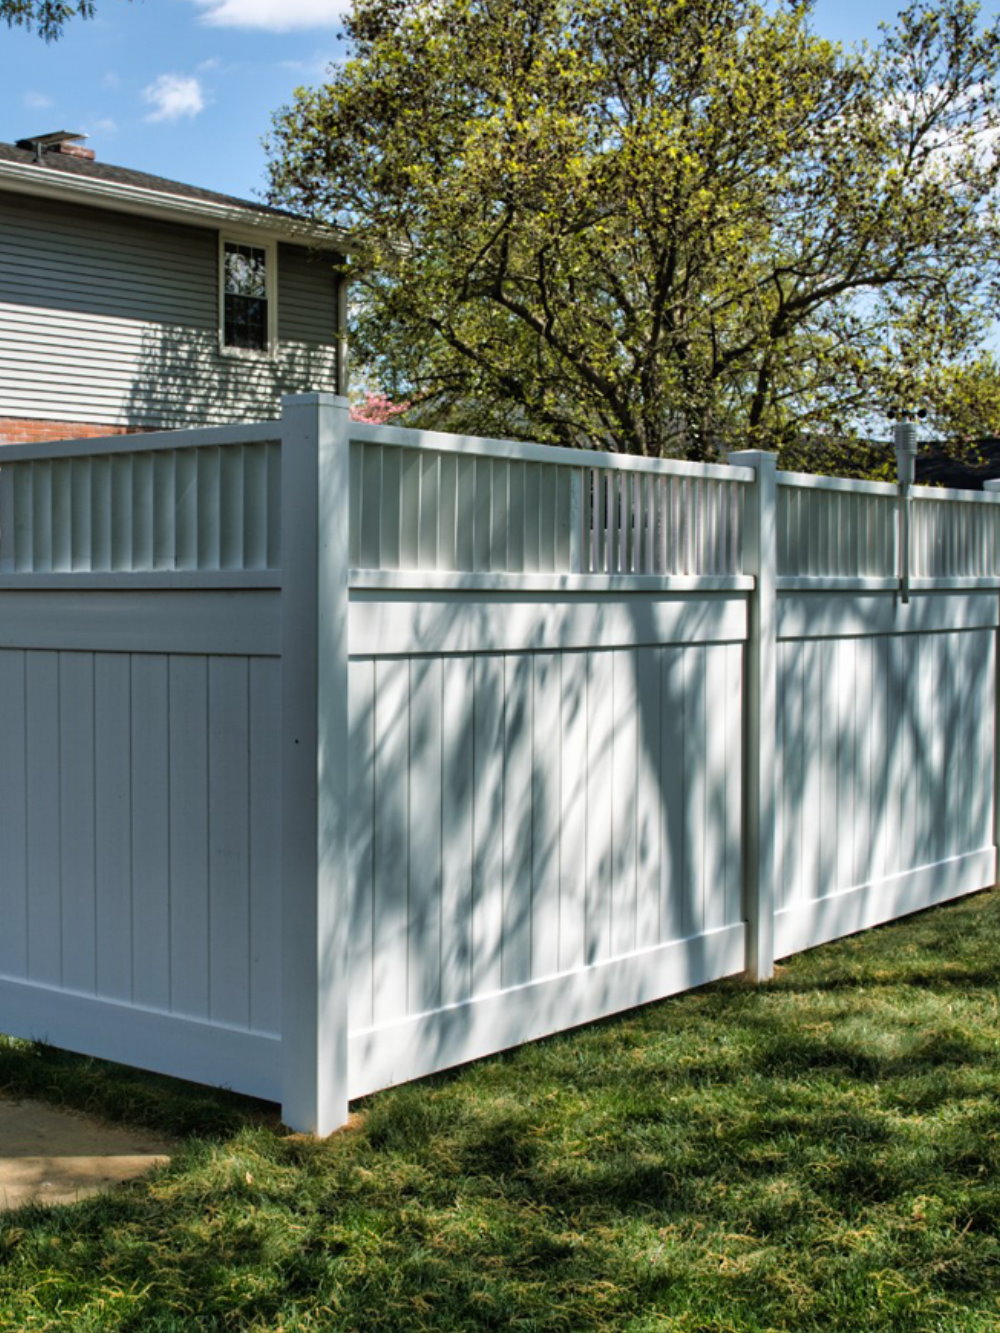 Types of fences we install in Cloverport KY